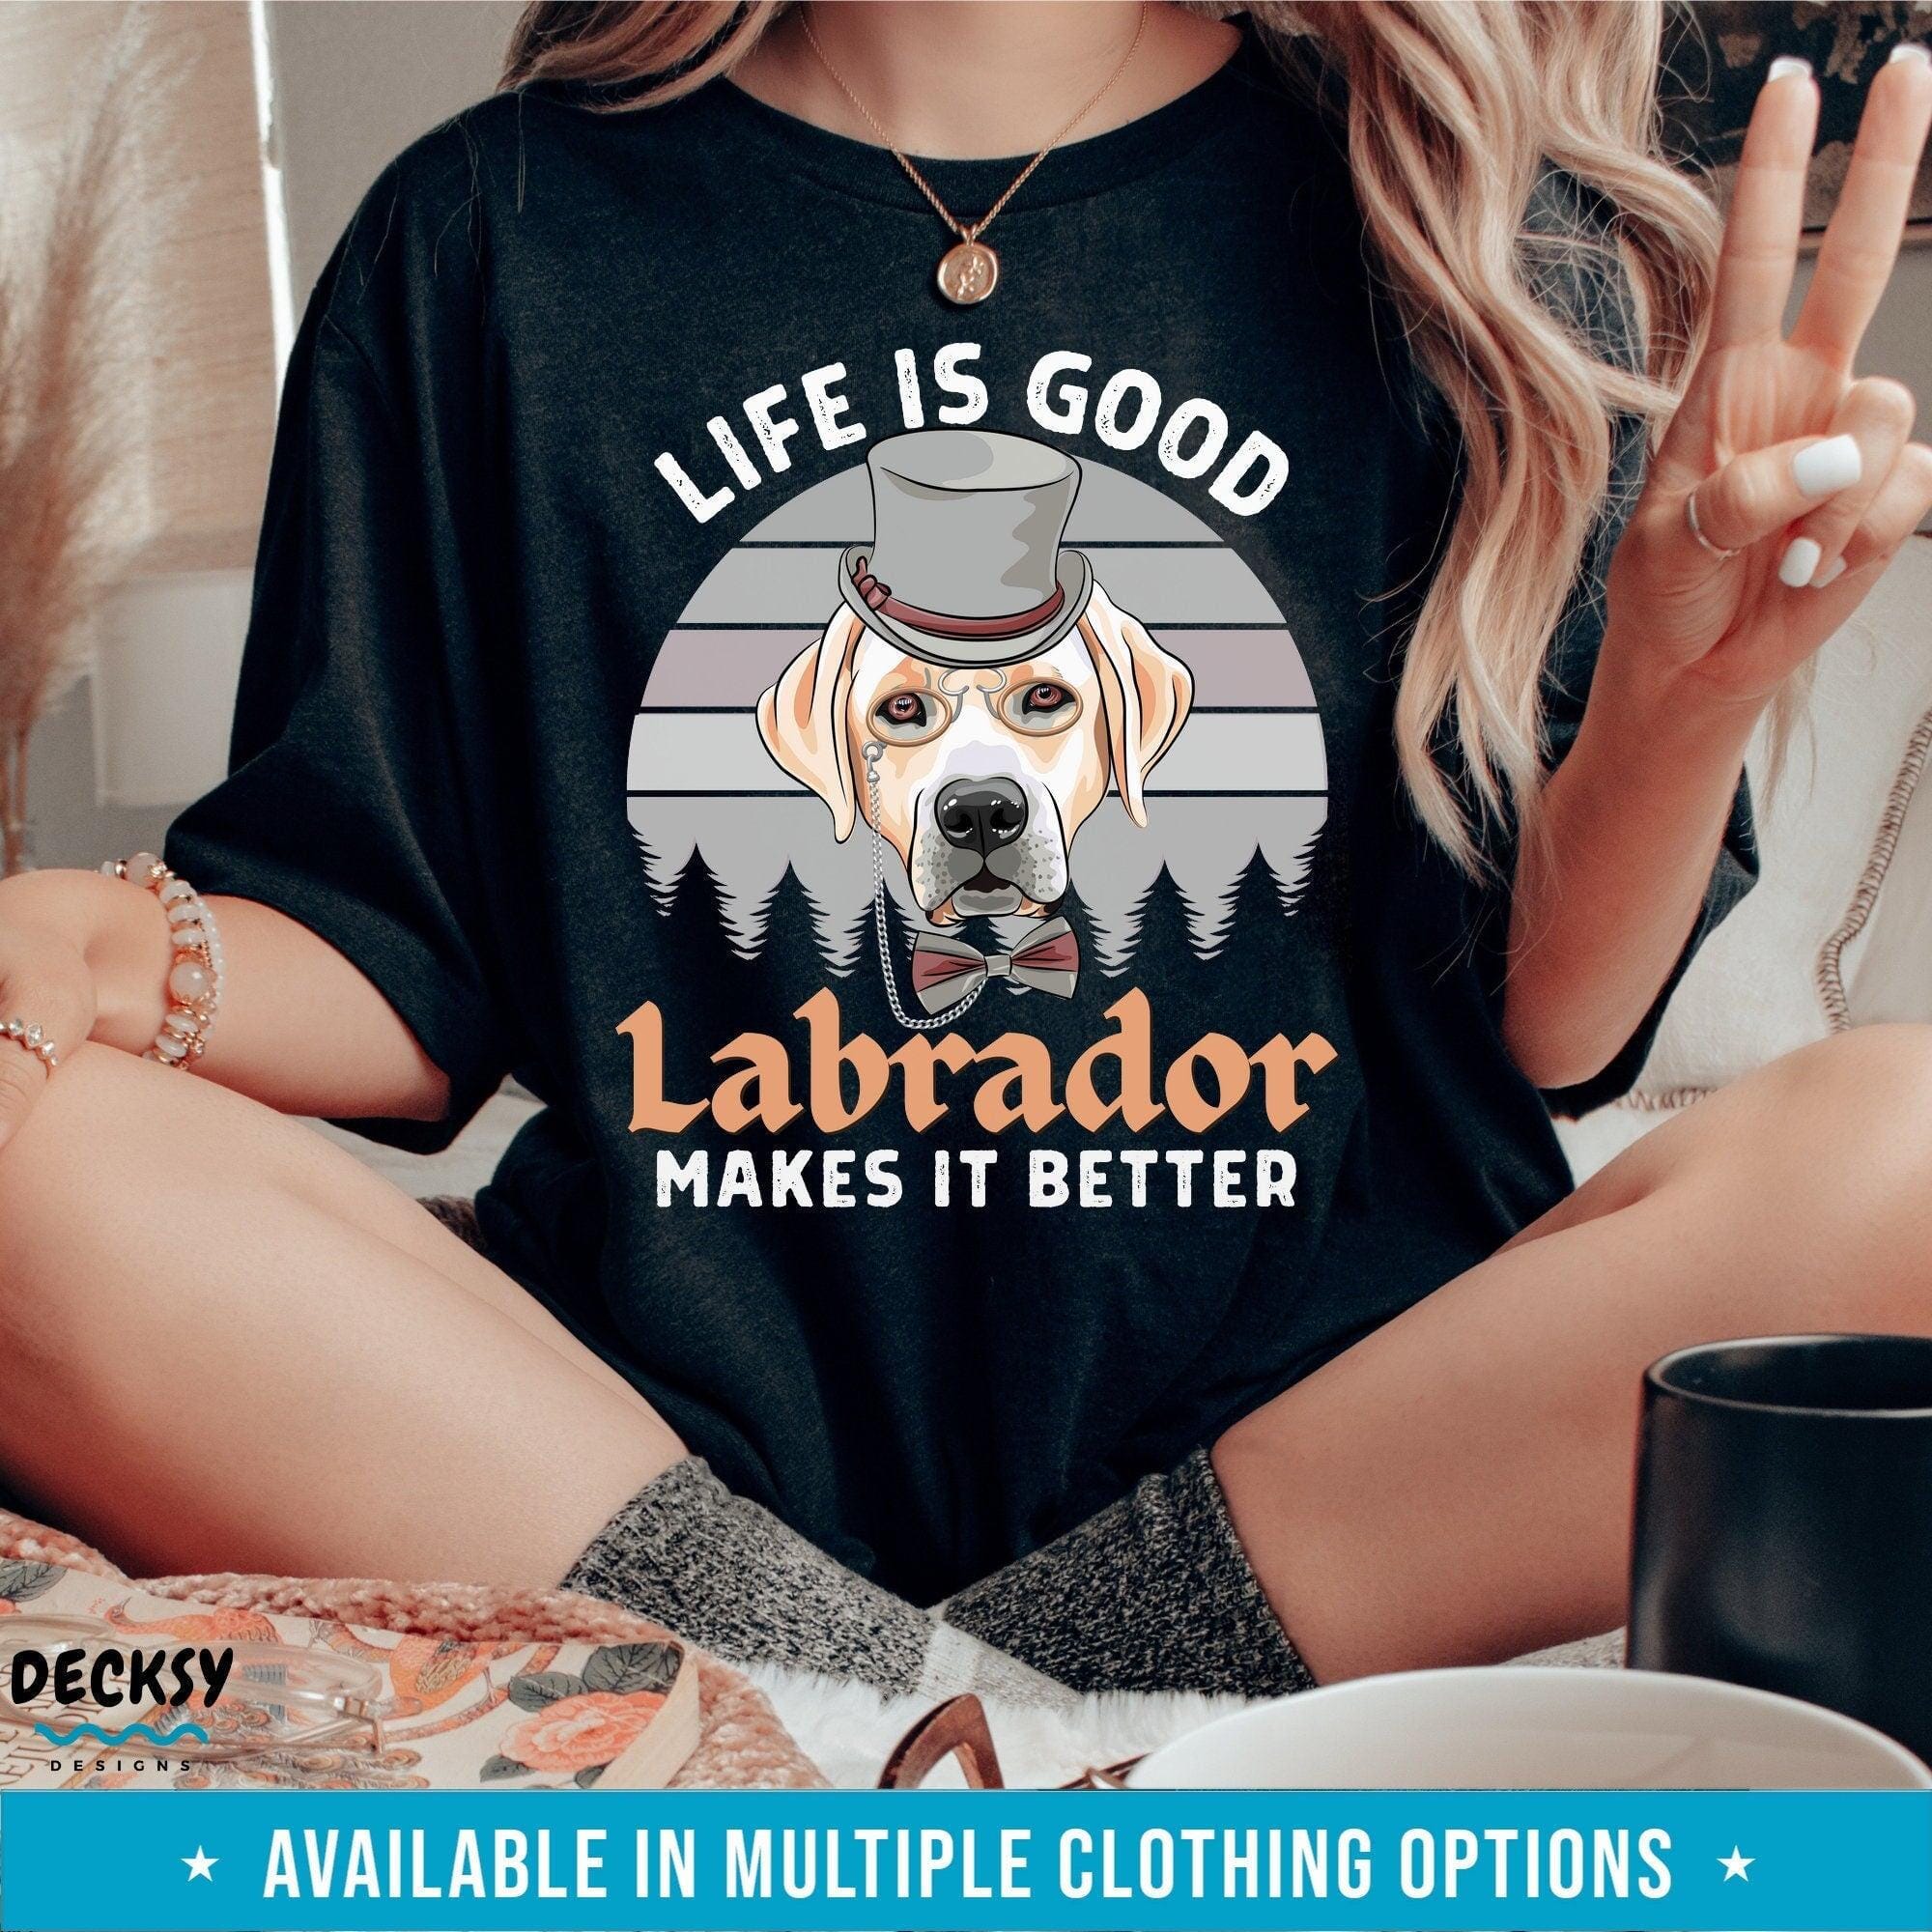 Labrador Shirt, Dog Lover Gift-Clothing:Gender-Neutral Adult Clothing:Tops & Tees:T-shirts:Graphic Tees-DecksyDesigns